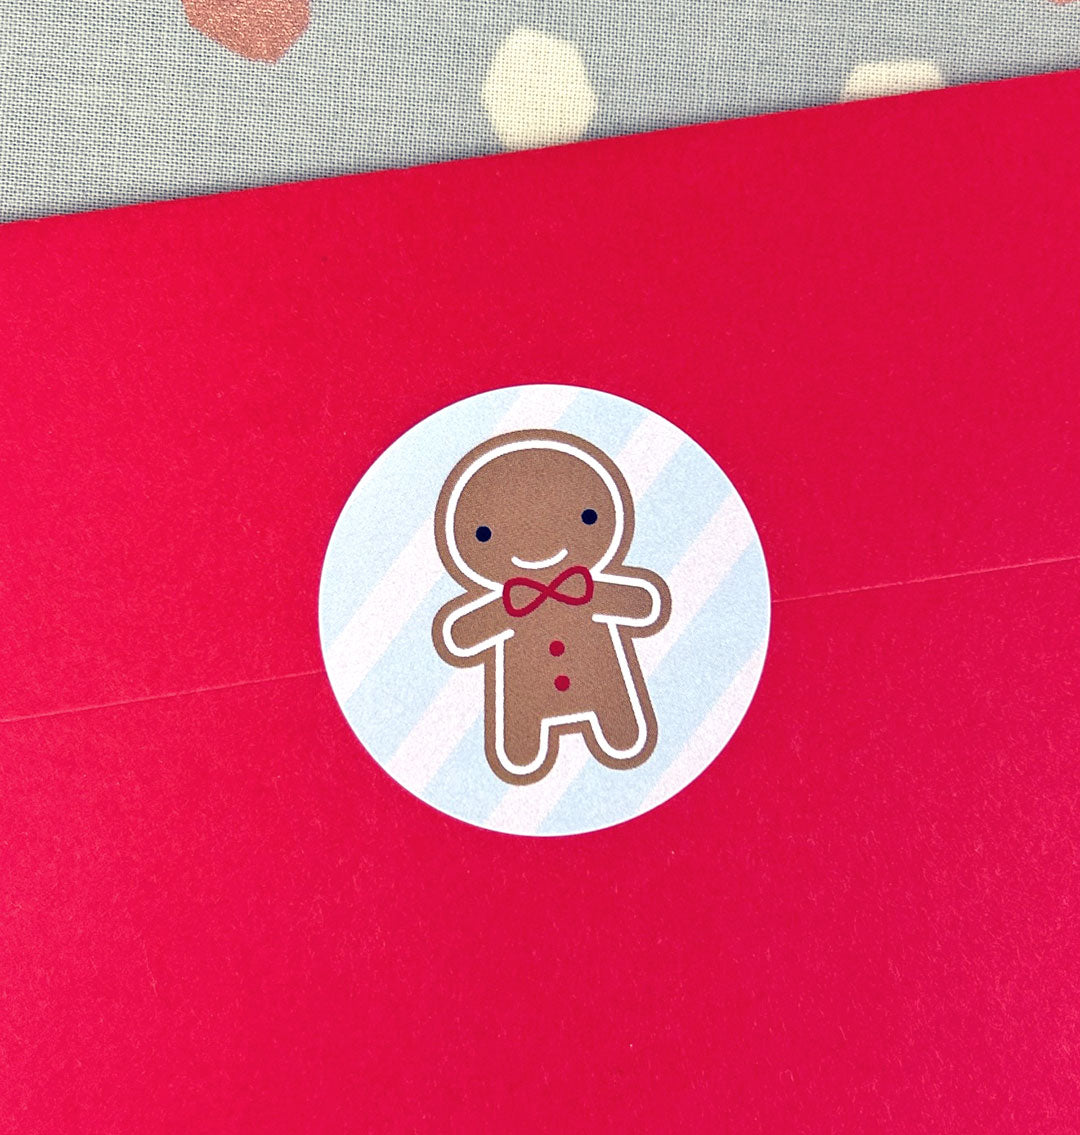 Close up of a red envelope sealed with a gingerbread man sticker